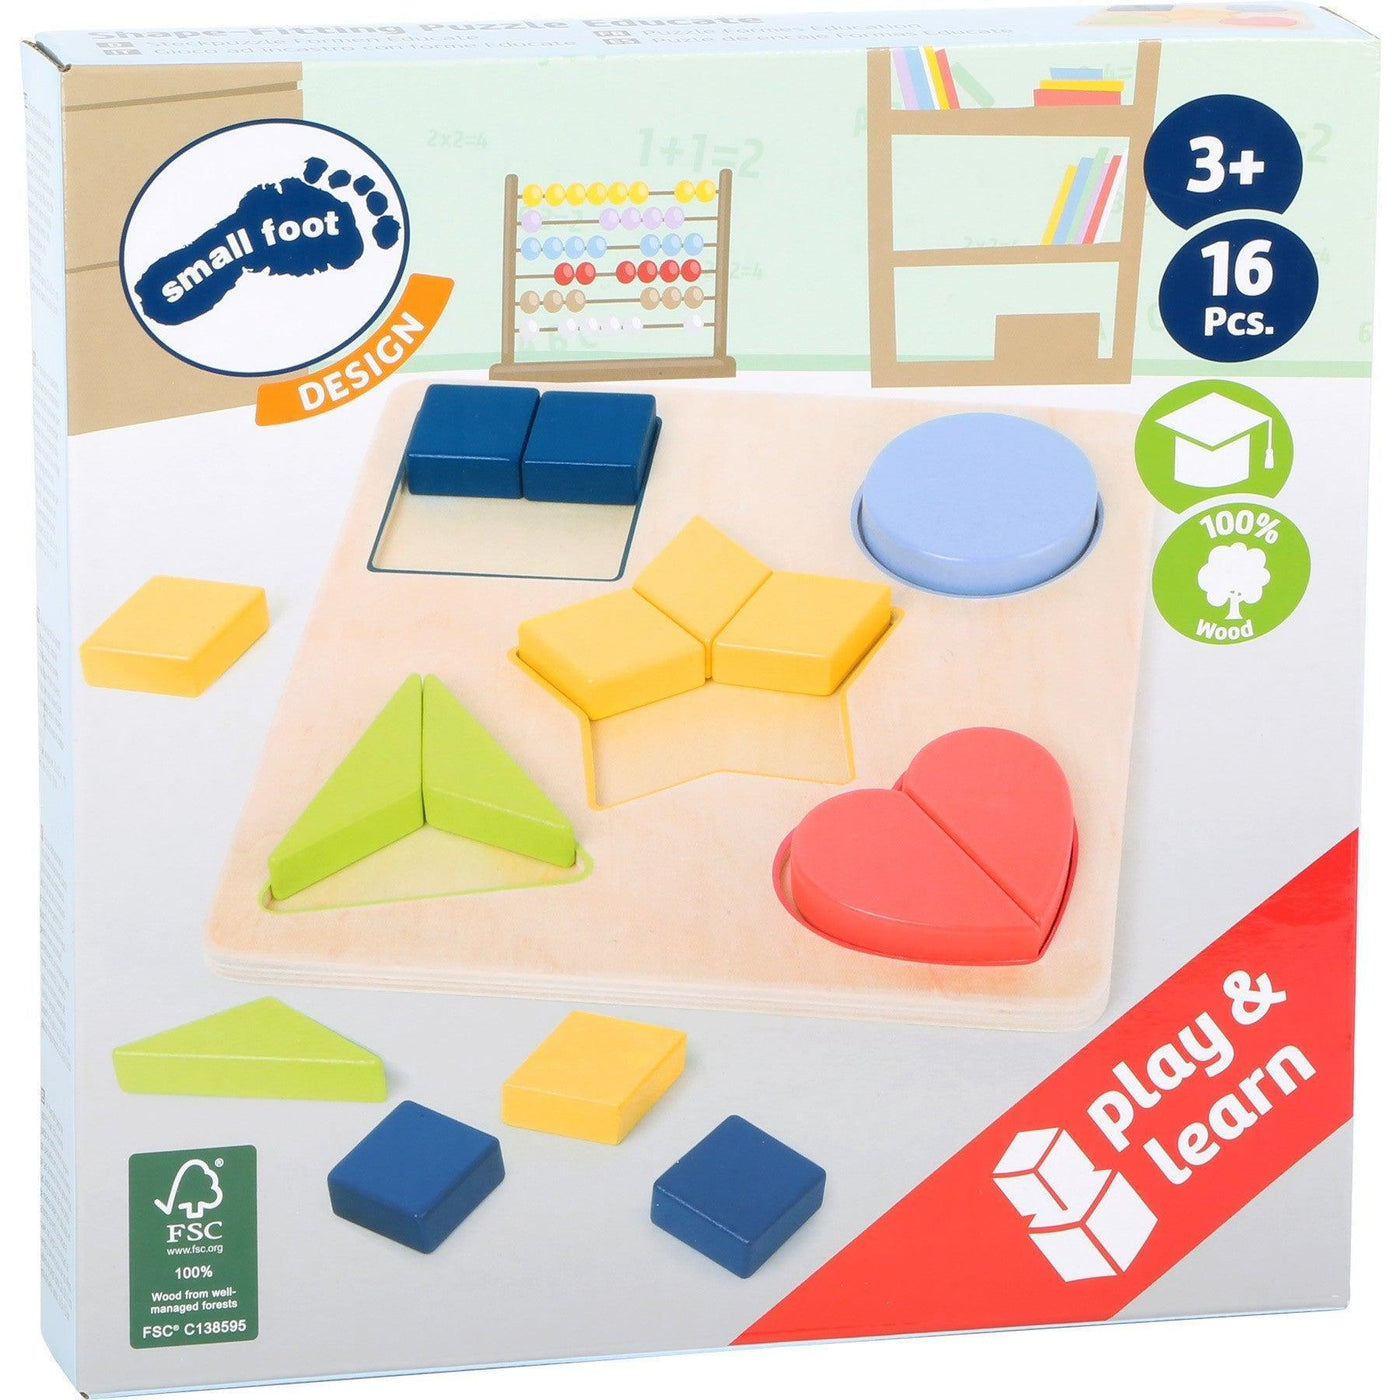 Shape-fitting Puzzle "Educate"